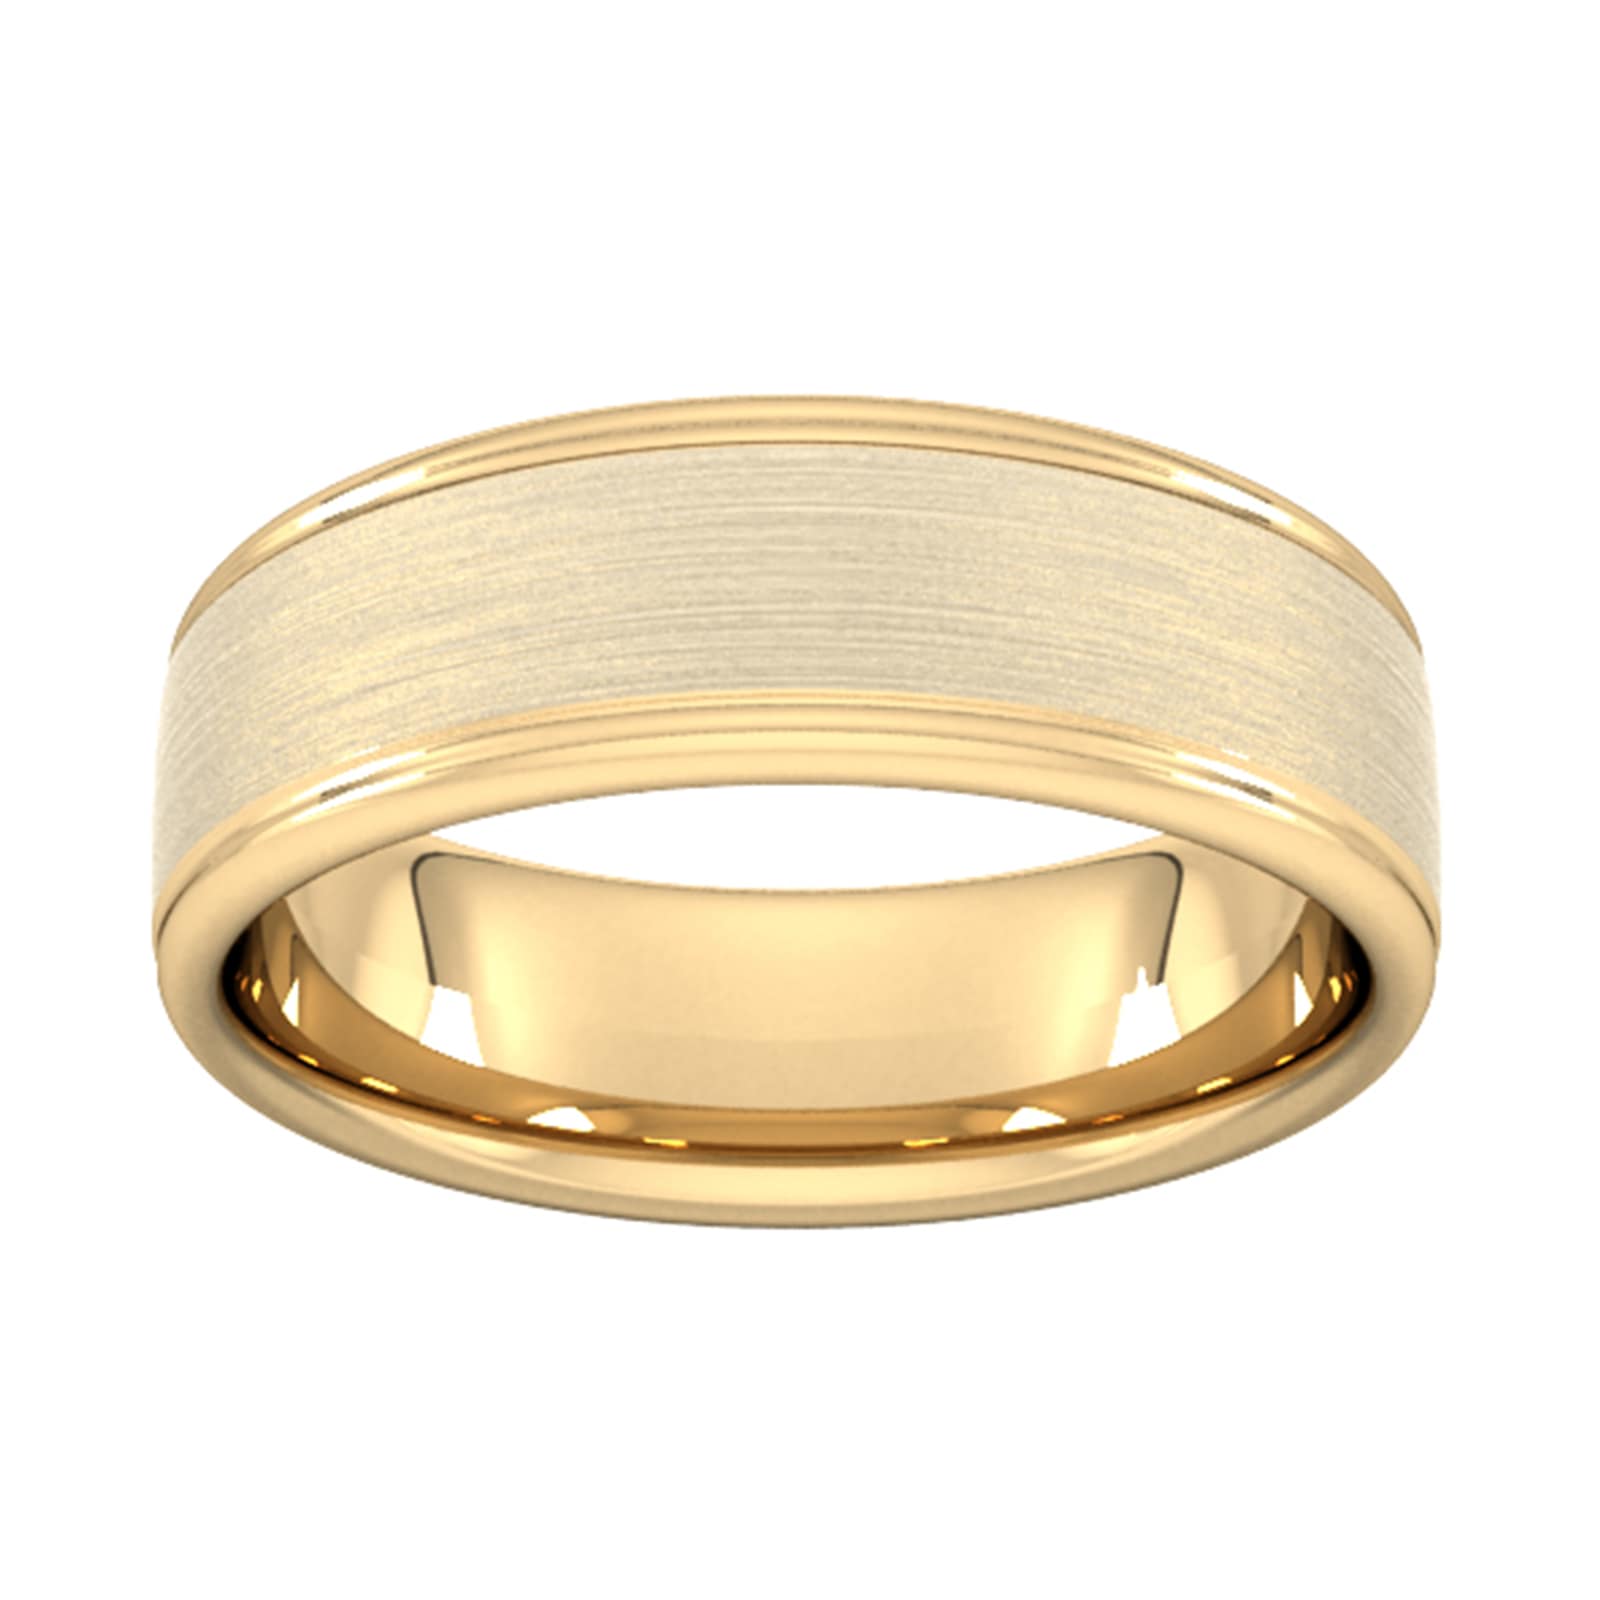 7mm Slight Court Heavy Matt Centre With Grooves Wedding Ring In 18 Carat Yellow Gold - Ring Size Q